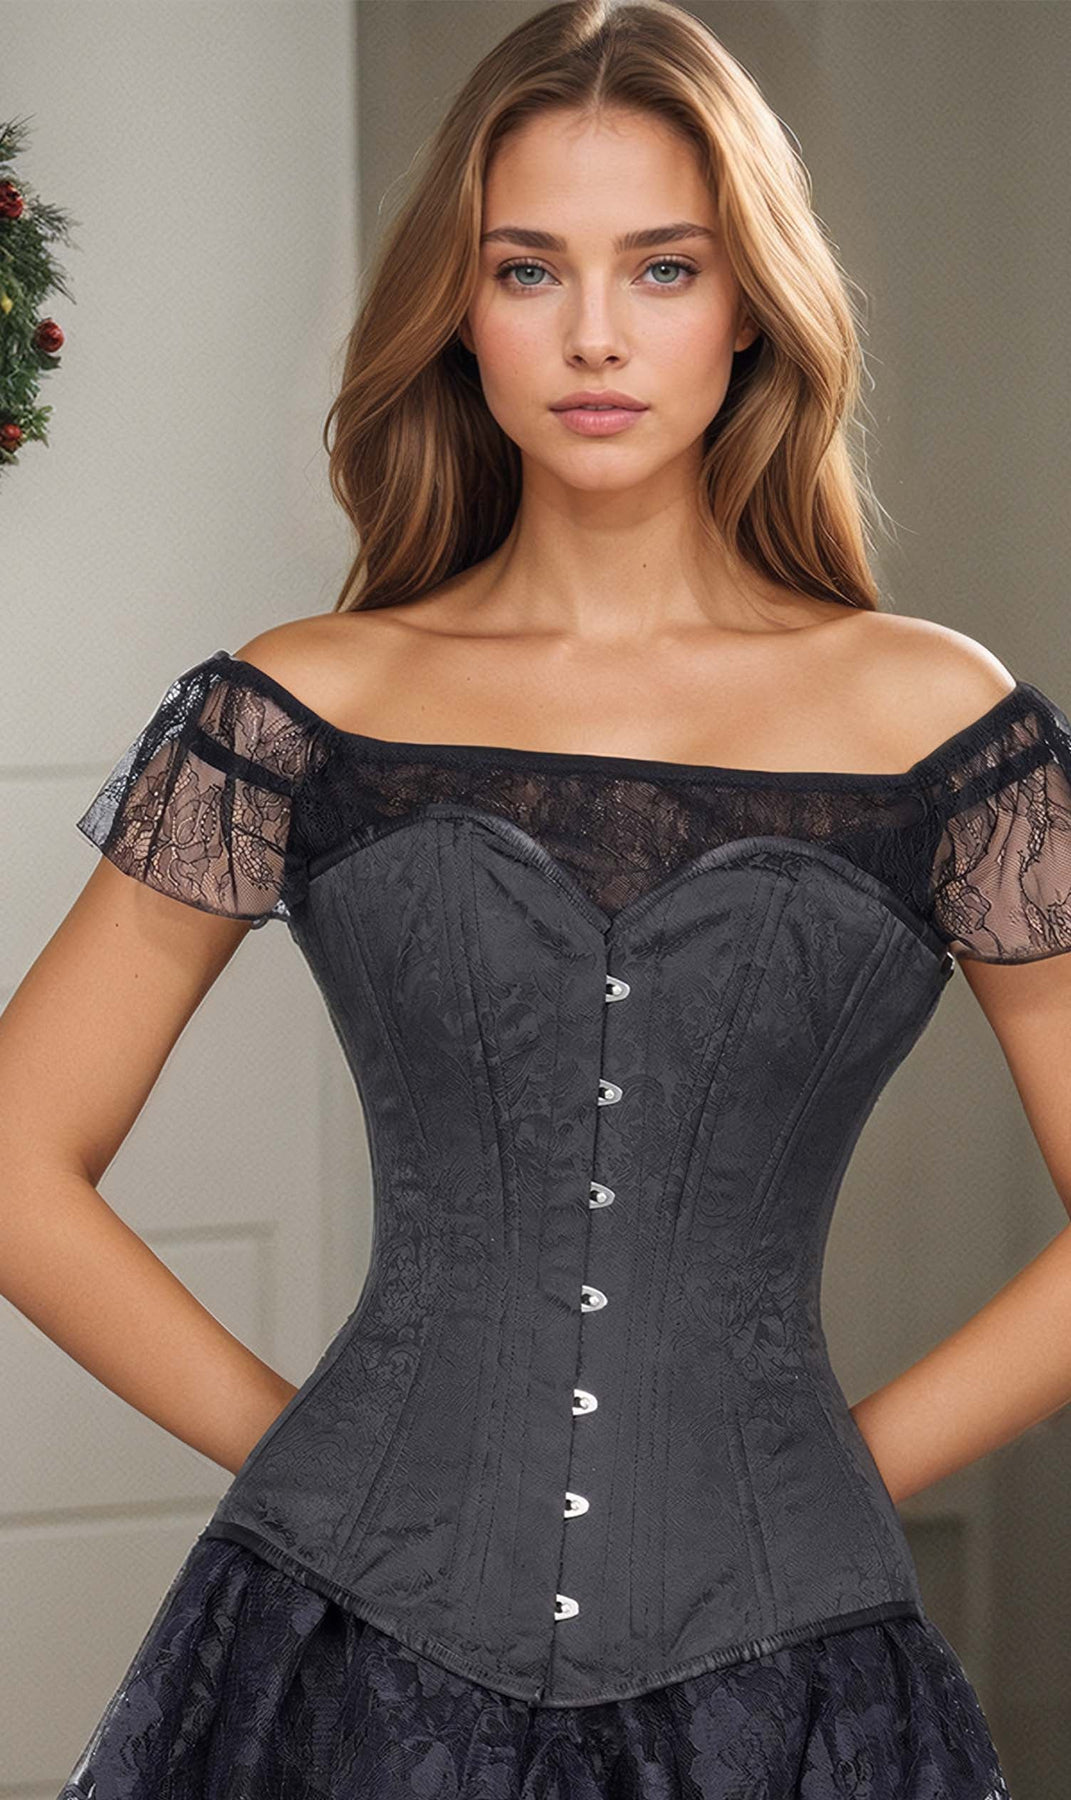 Vintage Corsets & Clothing for Waist Training and more- True Corset